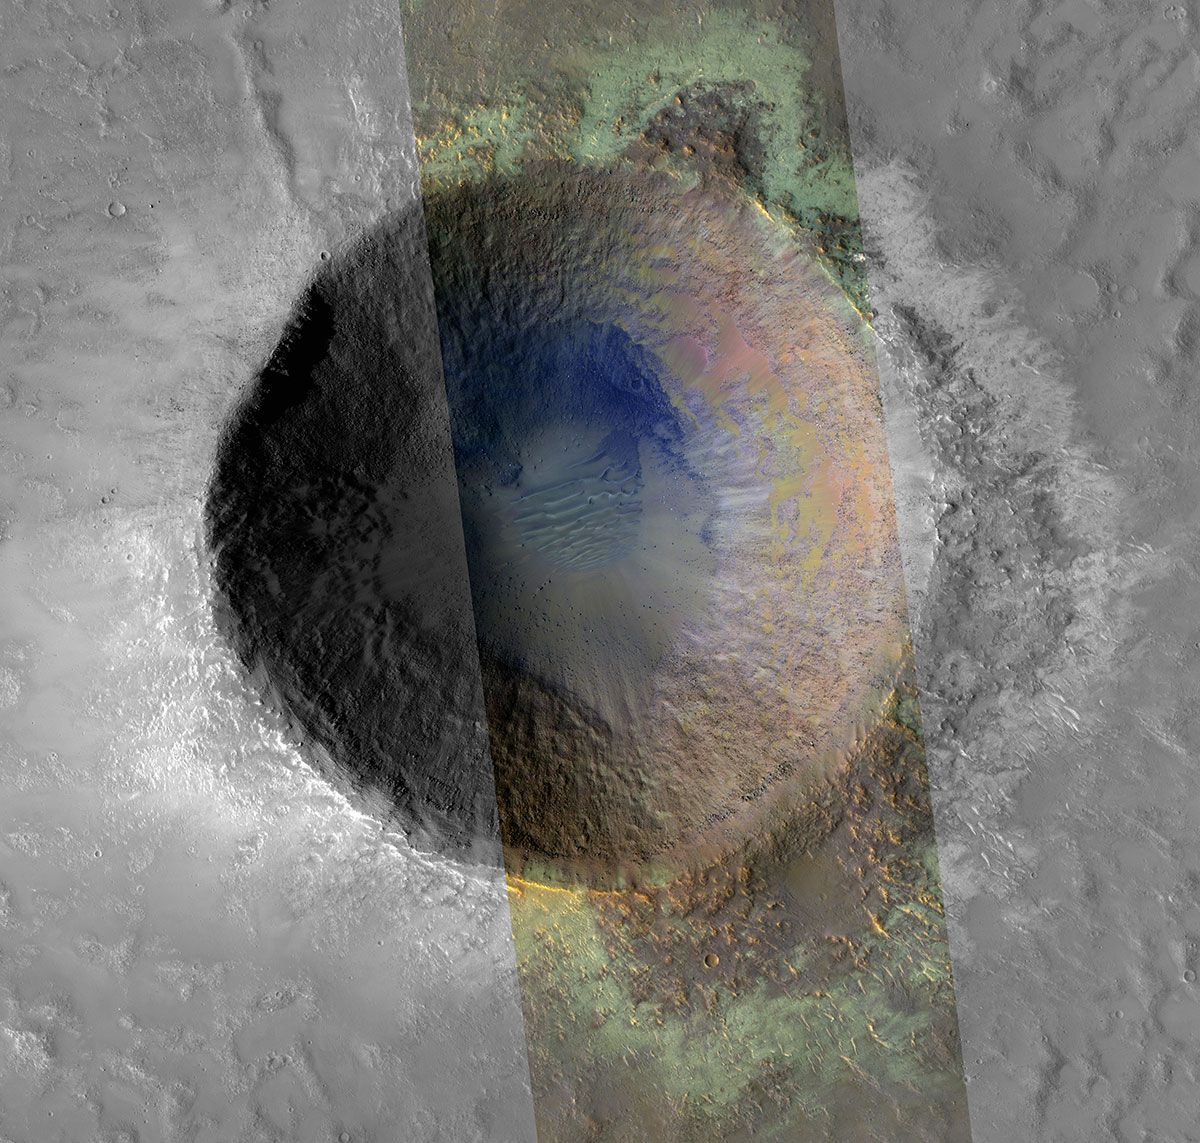 This impact crater in south Syrtis Major was captured by the HiRISE instrument on NASA’s MRO. Afterward, CRISM data was layered on top to reveal which minerals were present.